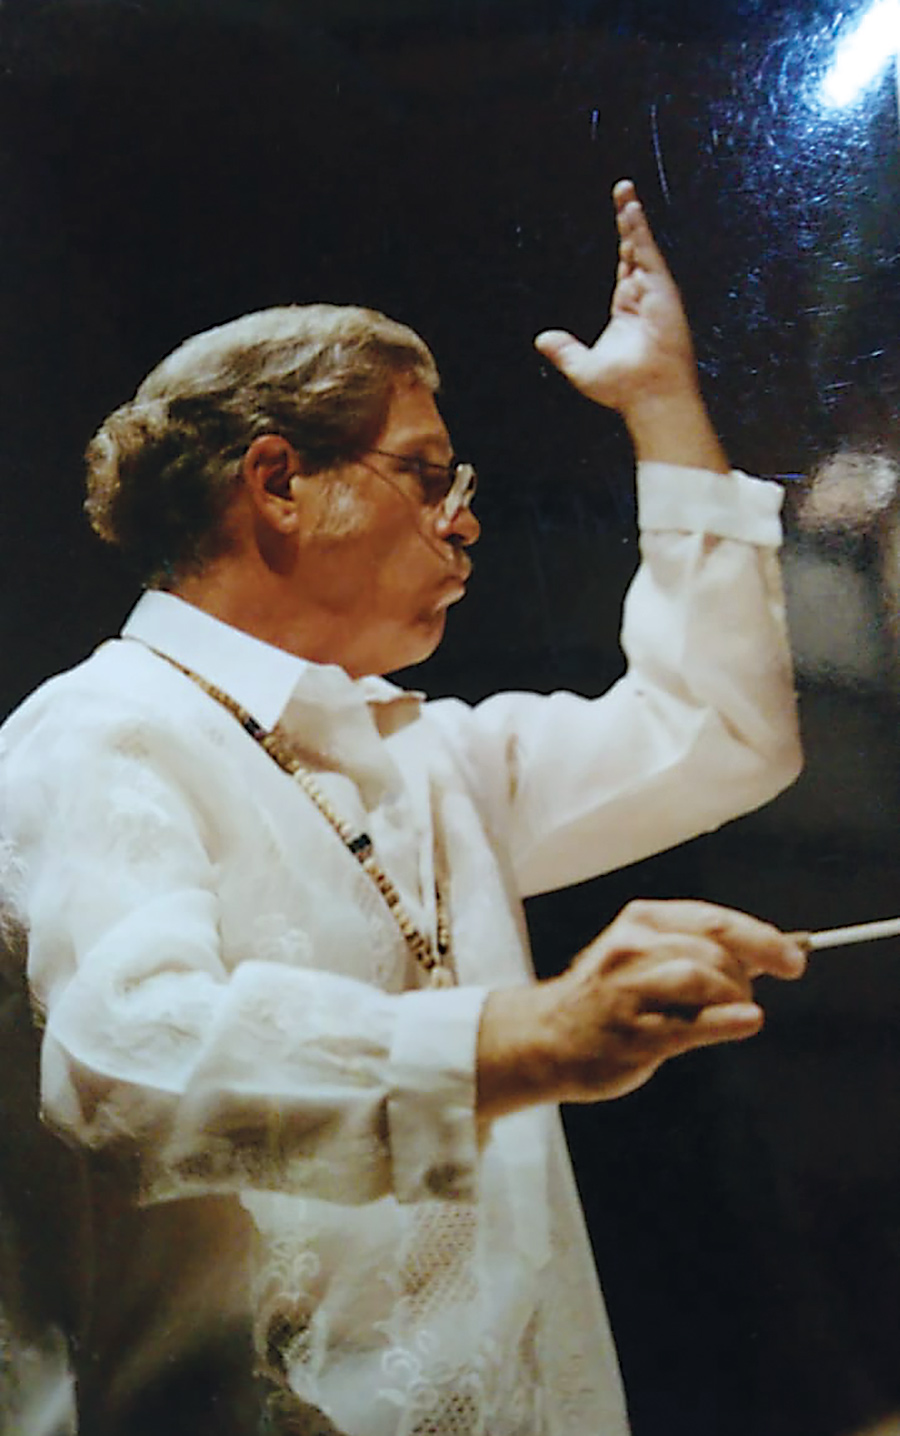 A man dressed in white dramatically holds his left arm in the air as he conducts an orchestra.